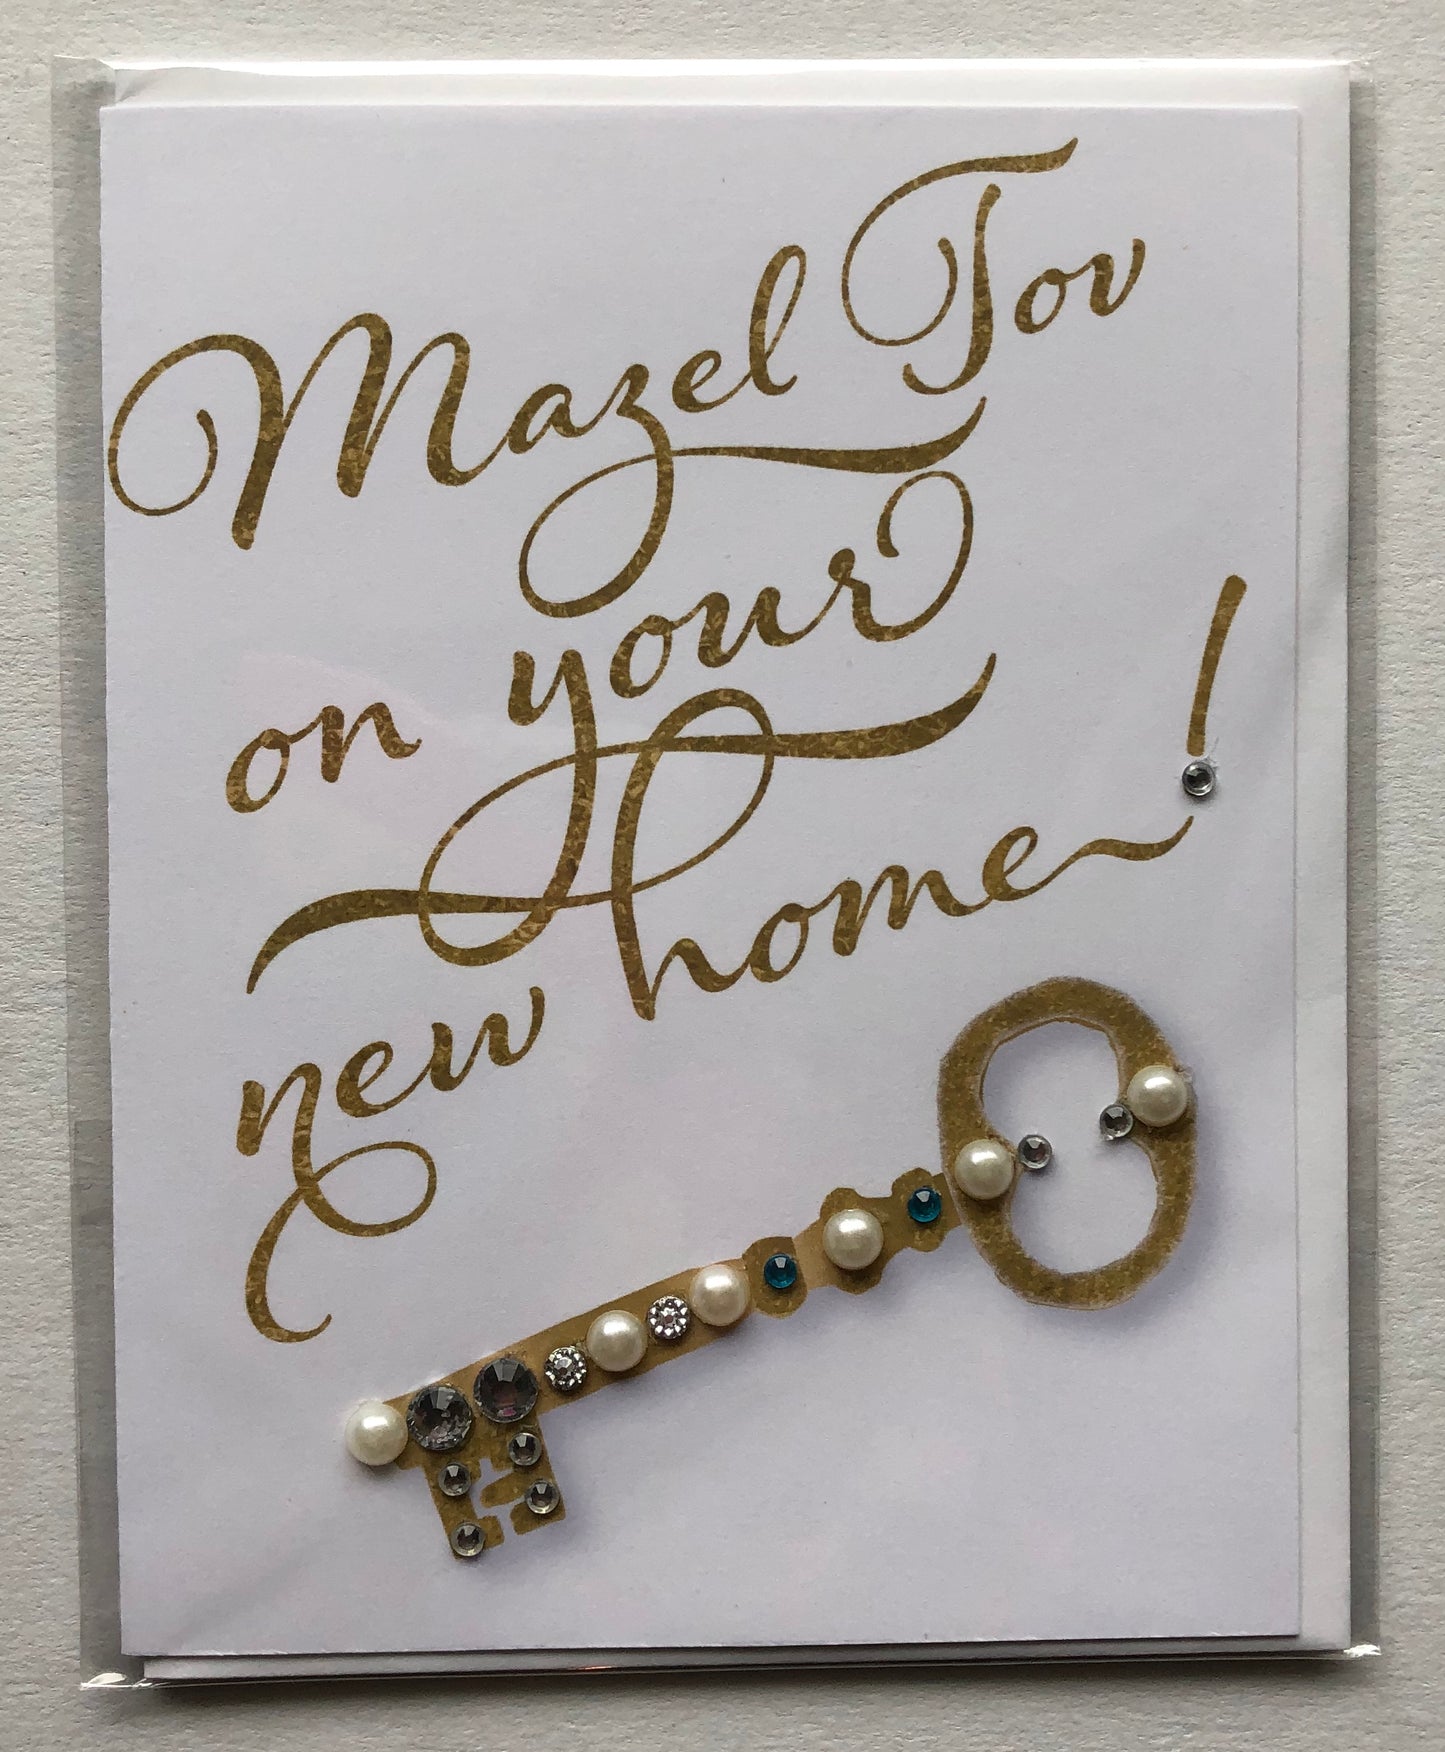 Mazel Tov On Your New Home! Greeting Card